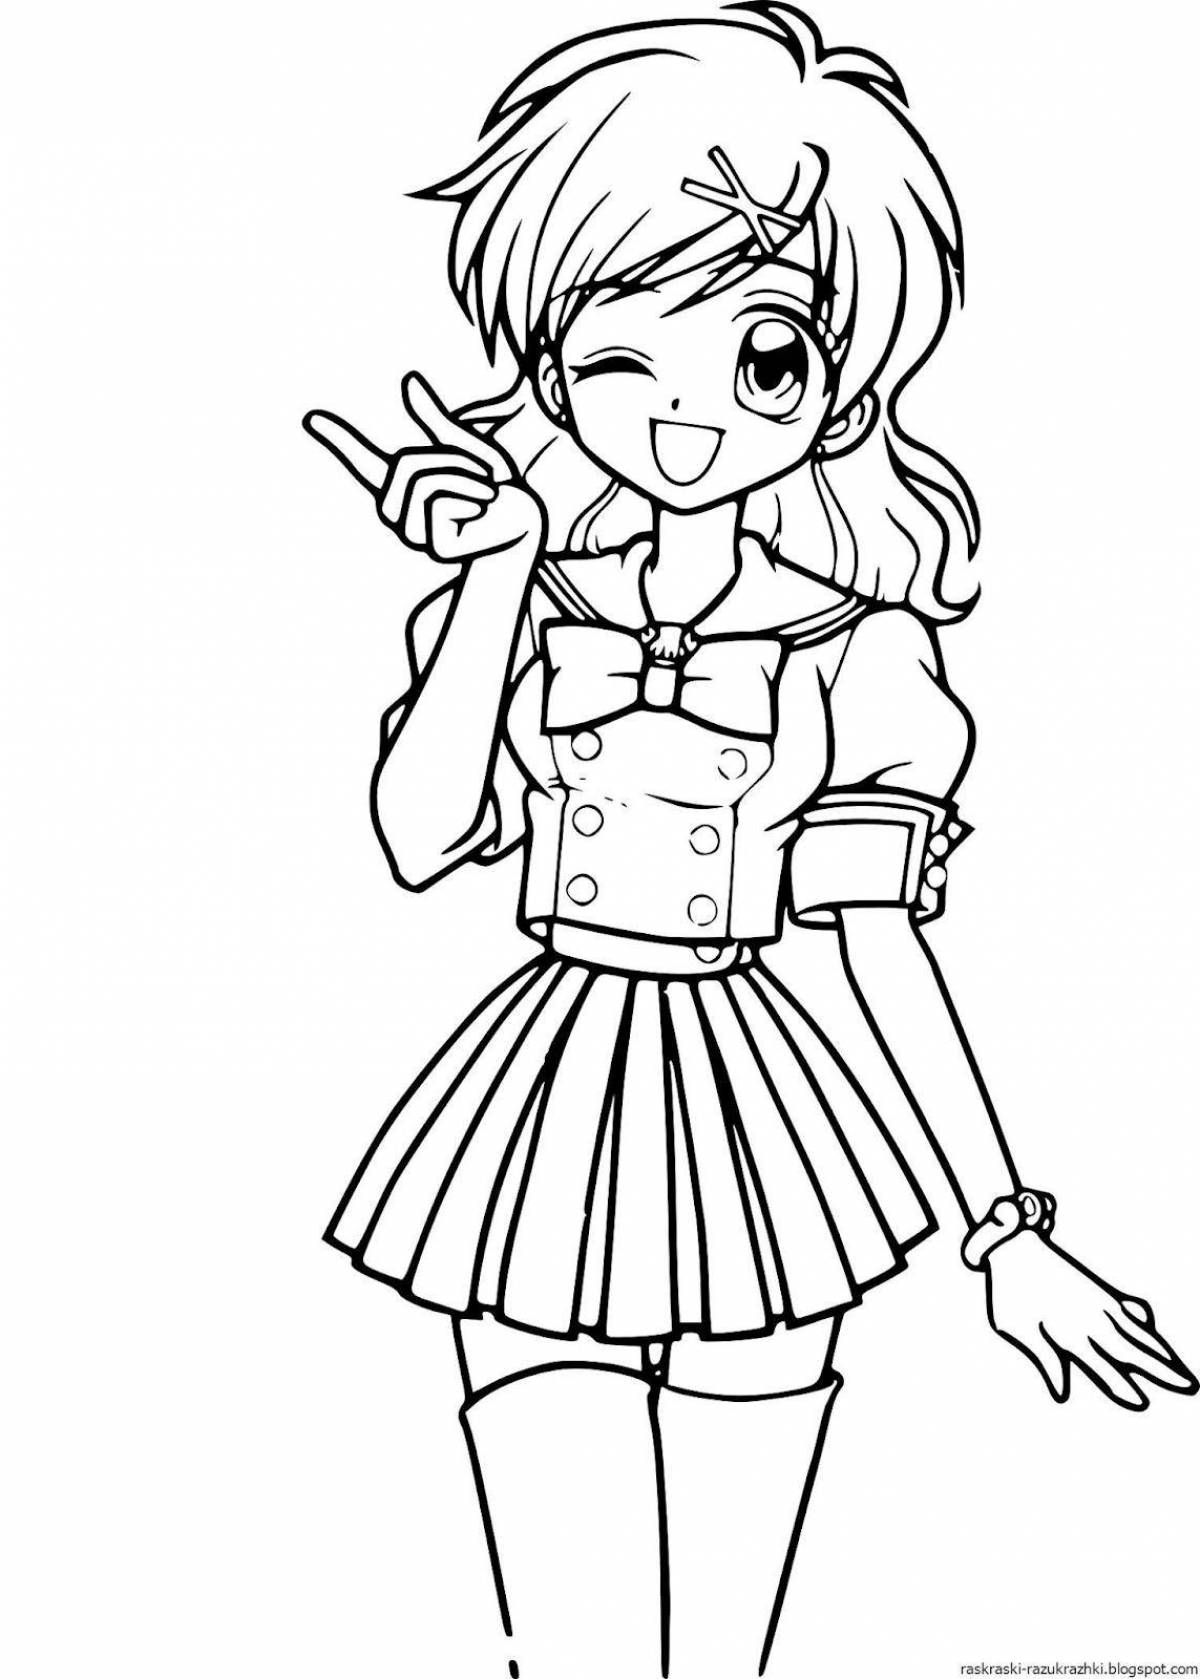 Jocular coloring page anime funny